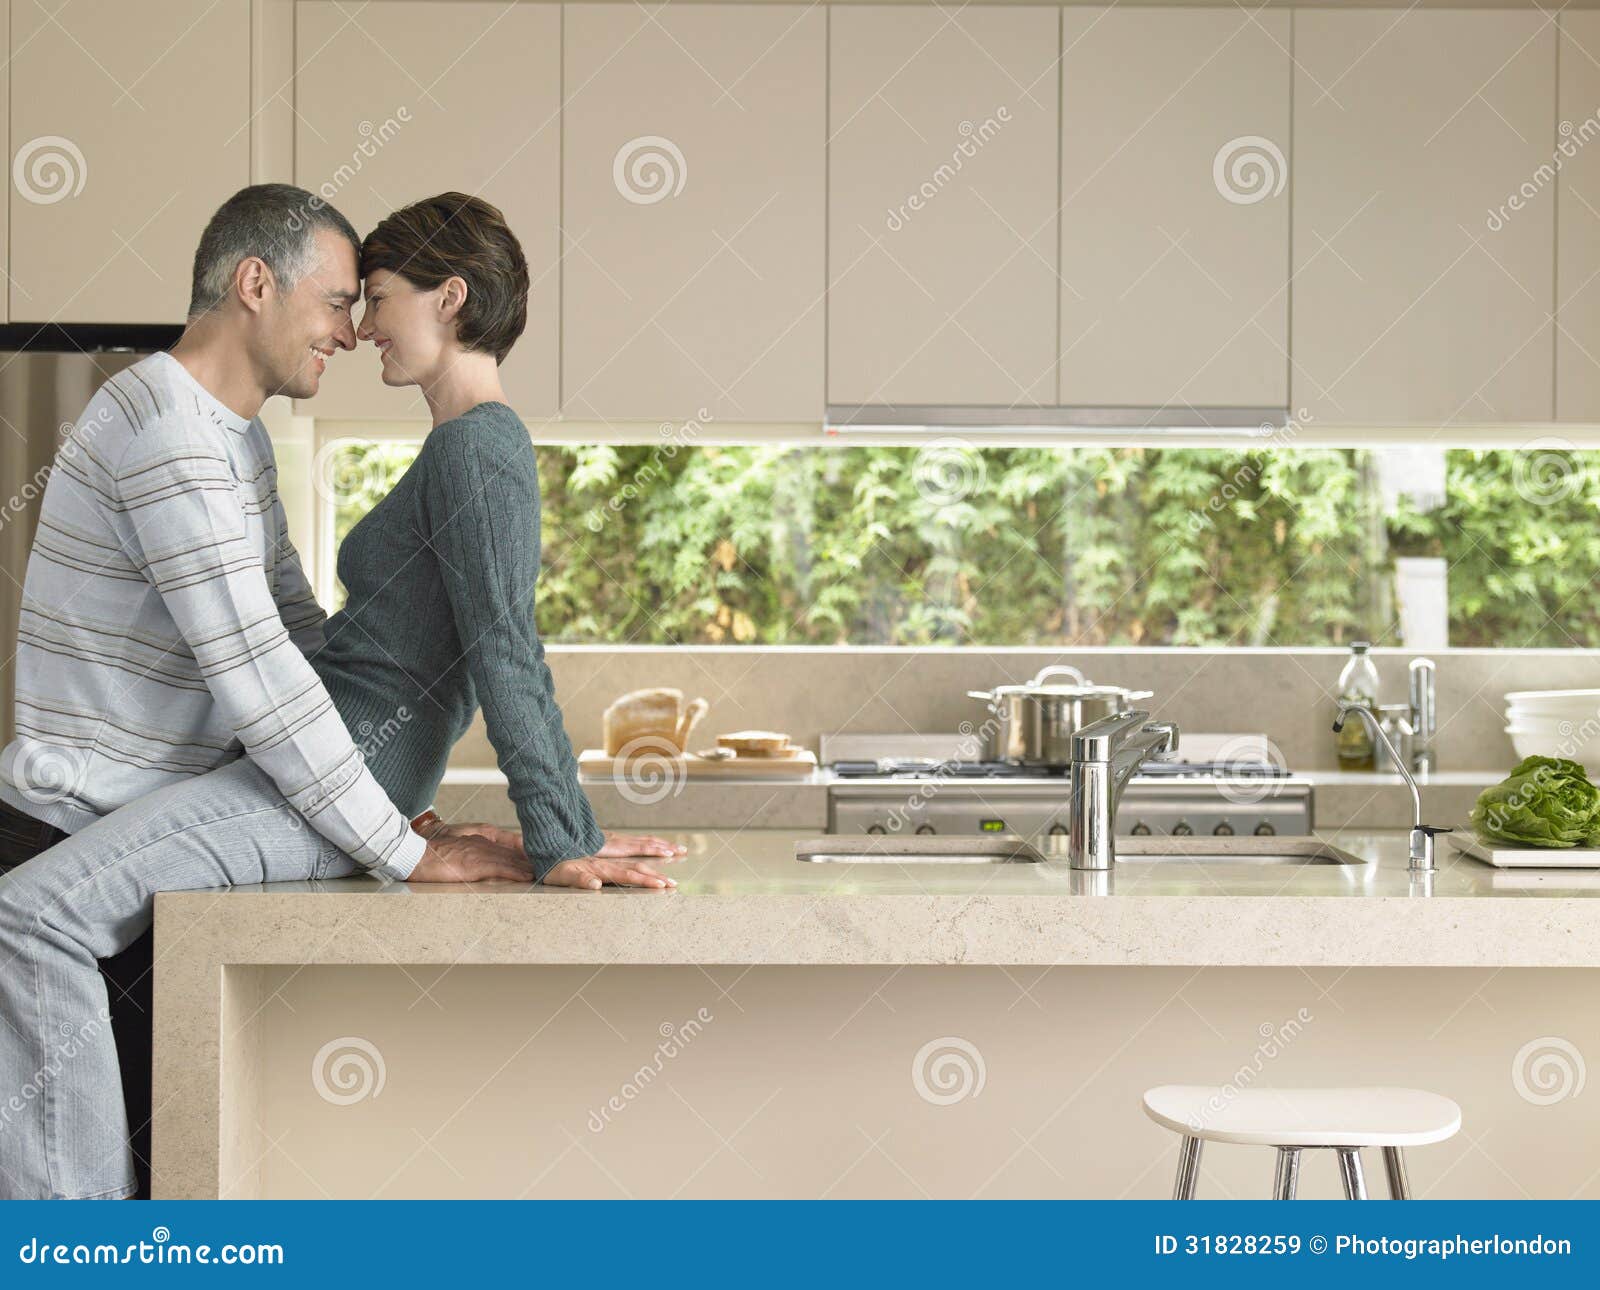 Couple Rubbing Noses In Kitchen Royalty Free Stock Images Image 31828259